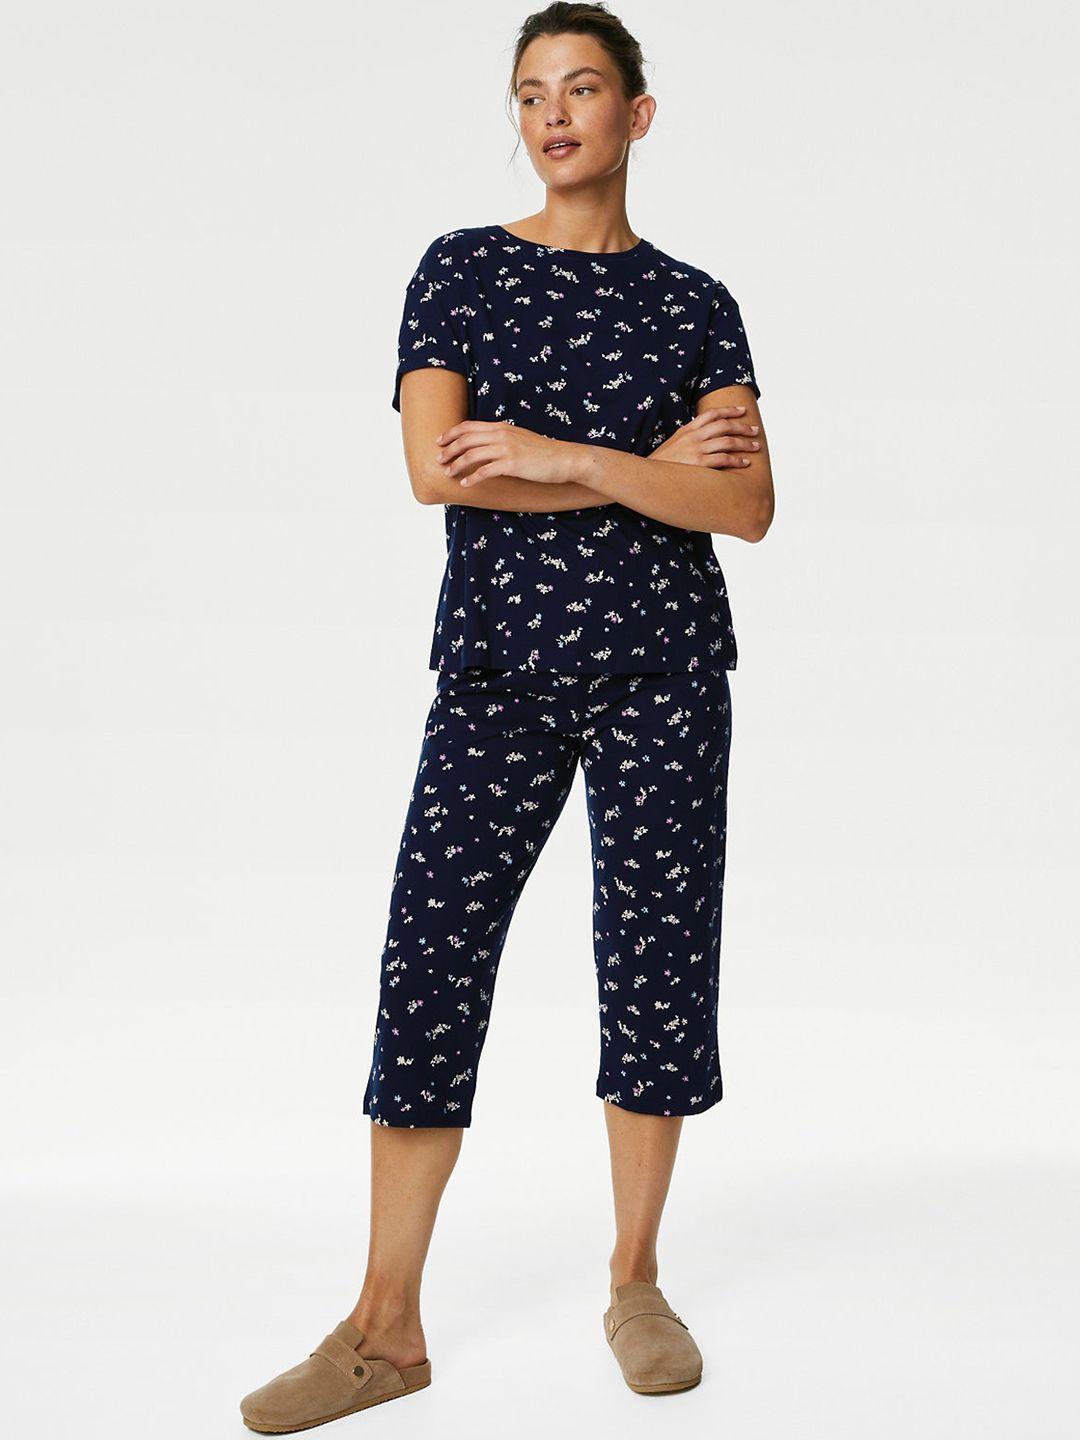 marks-&-spencer-floral-printed-pure-cotton-night-suit